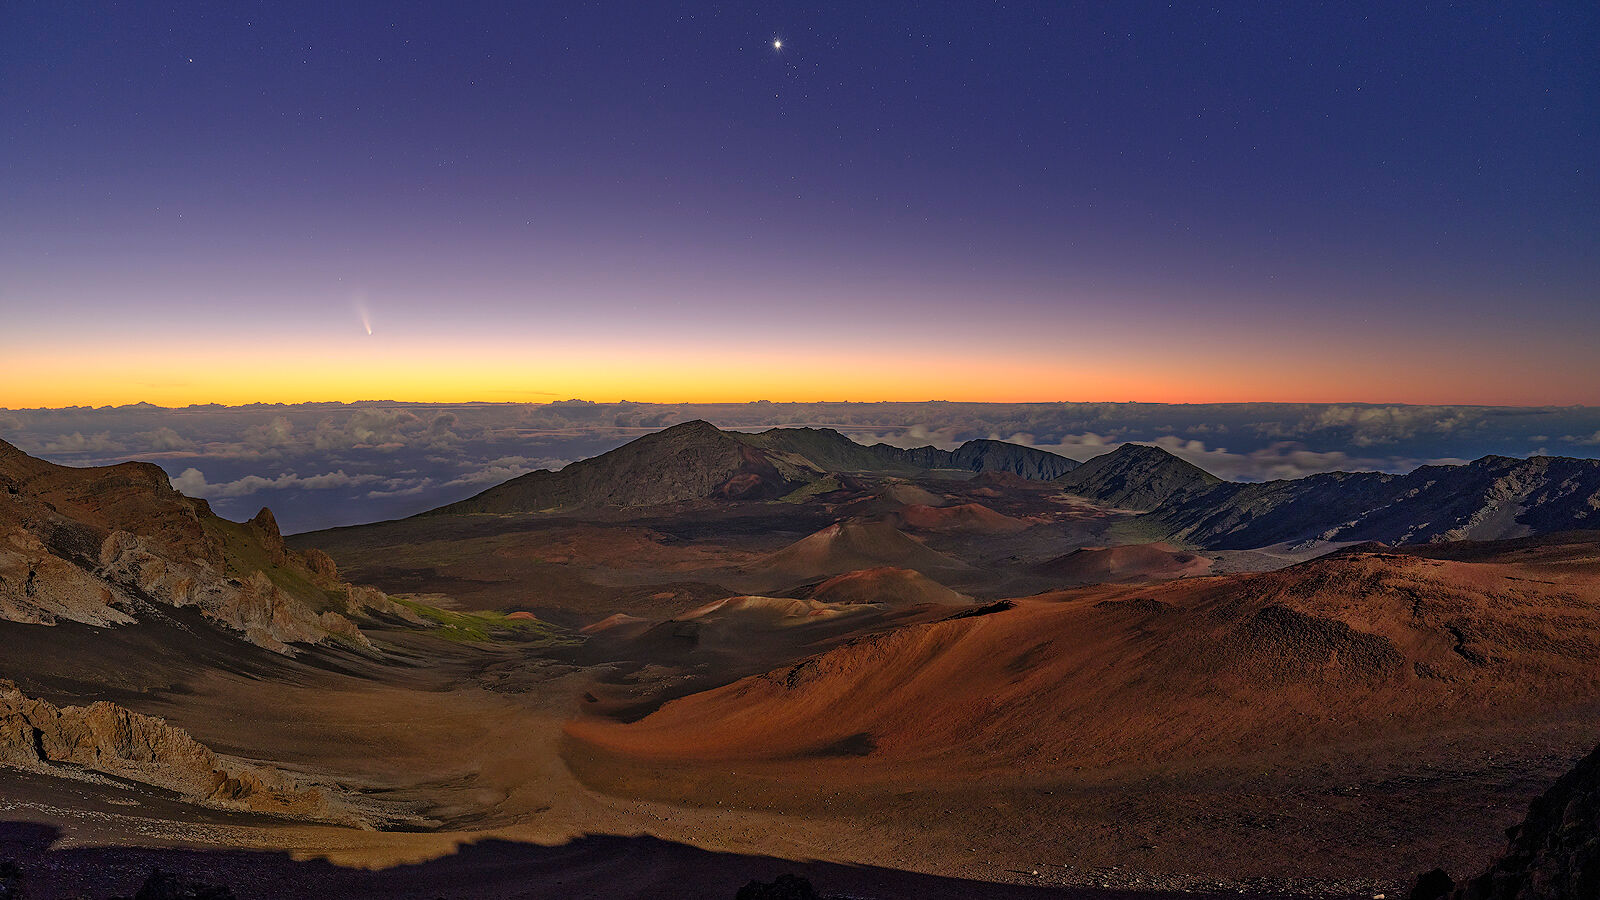 panoramic view of Haleakala Crater just before sunrise with the Neowise comet on the horizon